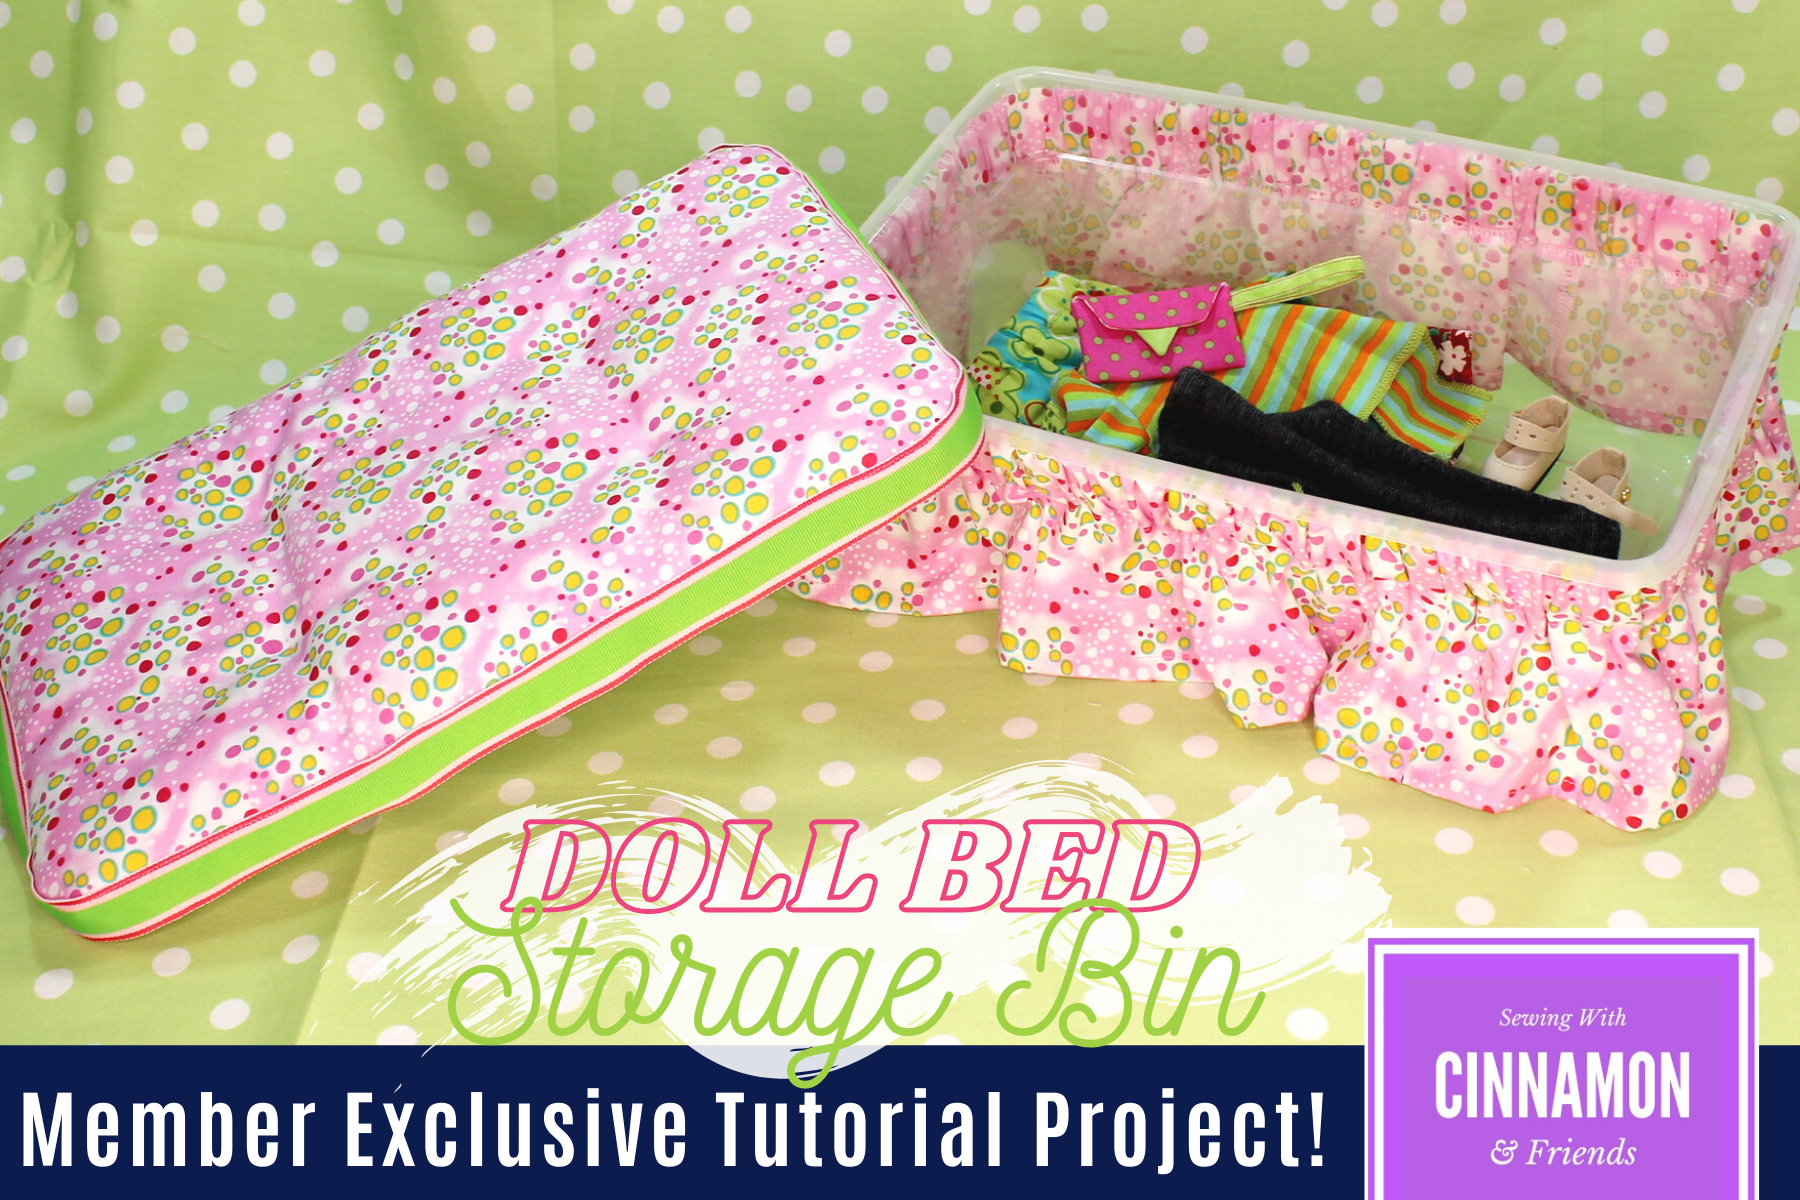 Doll Clothes Storage Master Class Video Course